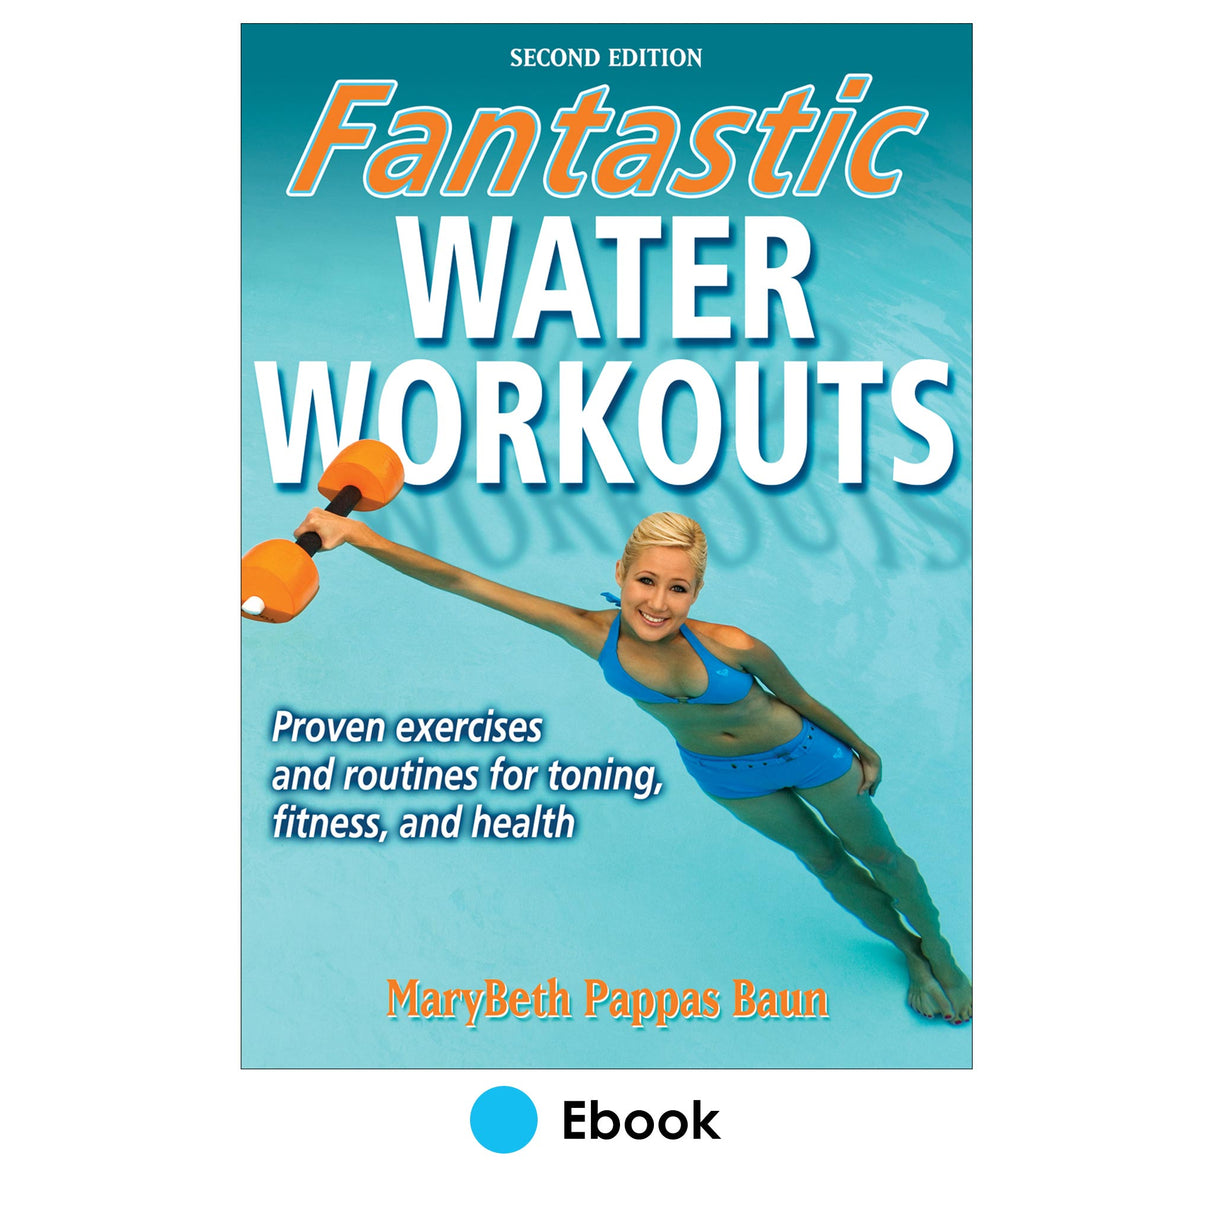 Fantastic Water Workouts 2nd Edition PDF